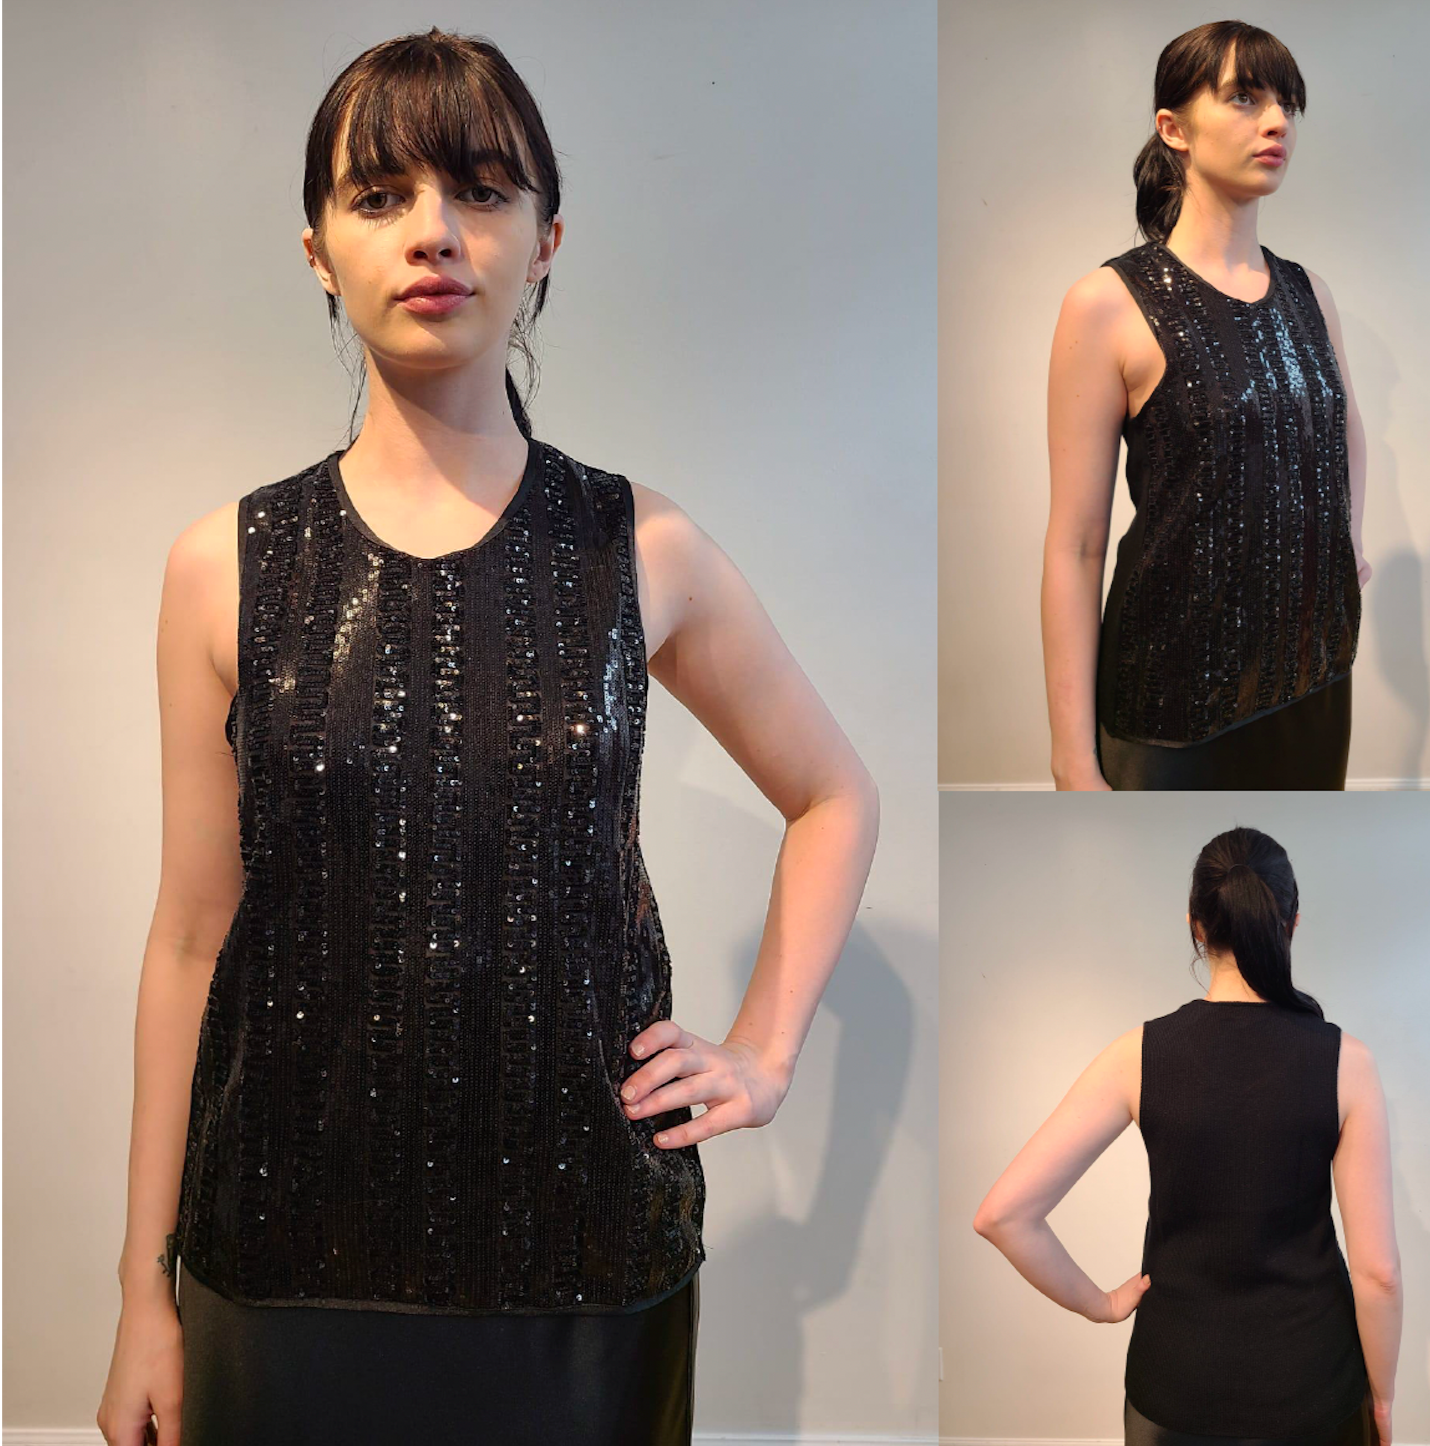 BLACK CASHMERE TANK WITH FRONT EMBELLISHED BLACK MICRO SEQUIN ANCIENT ROMAN MONOGRAM (SIZE XL)